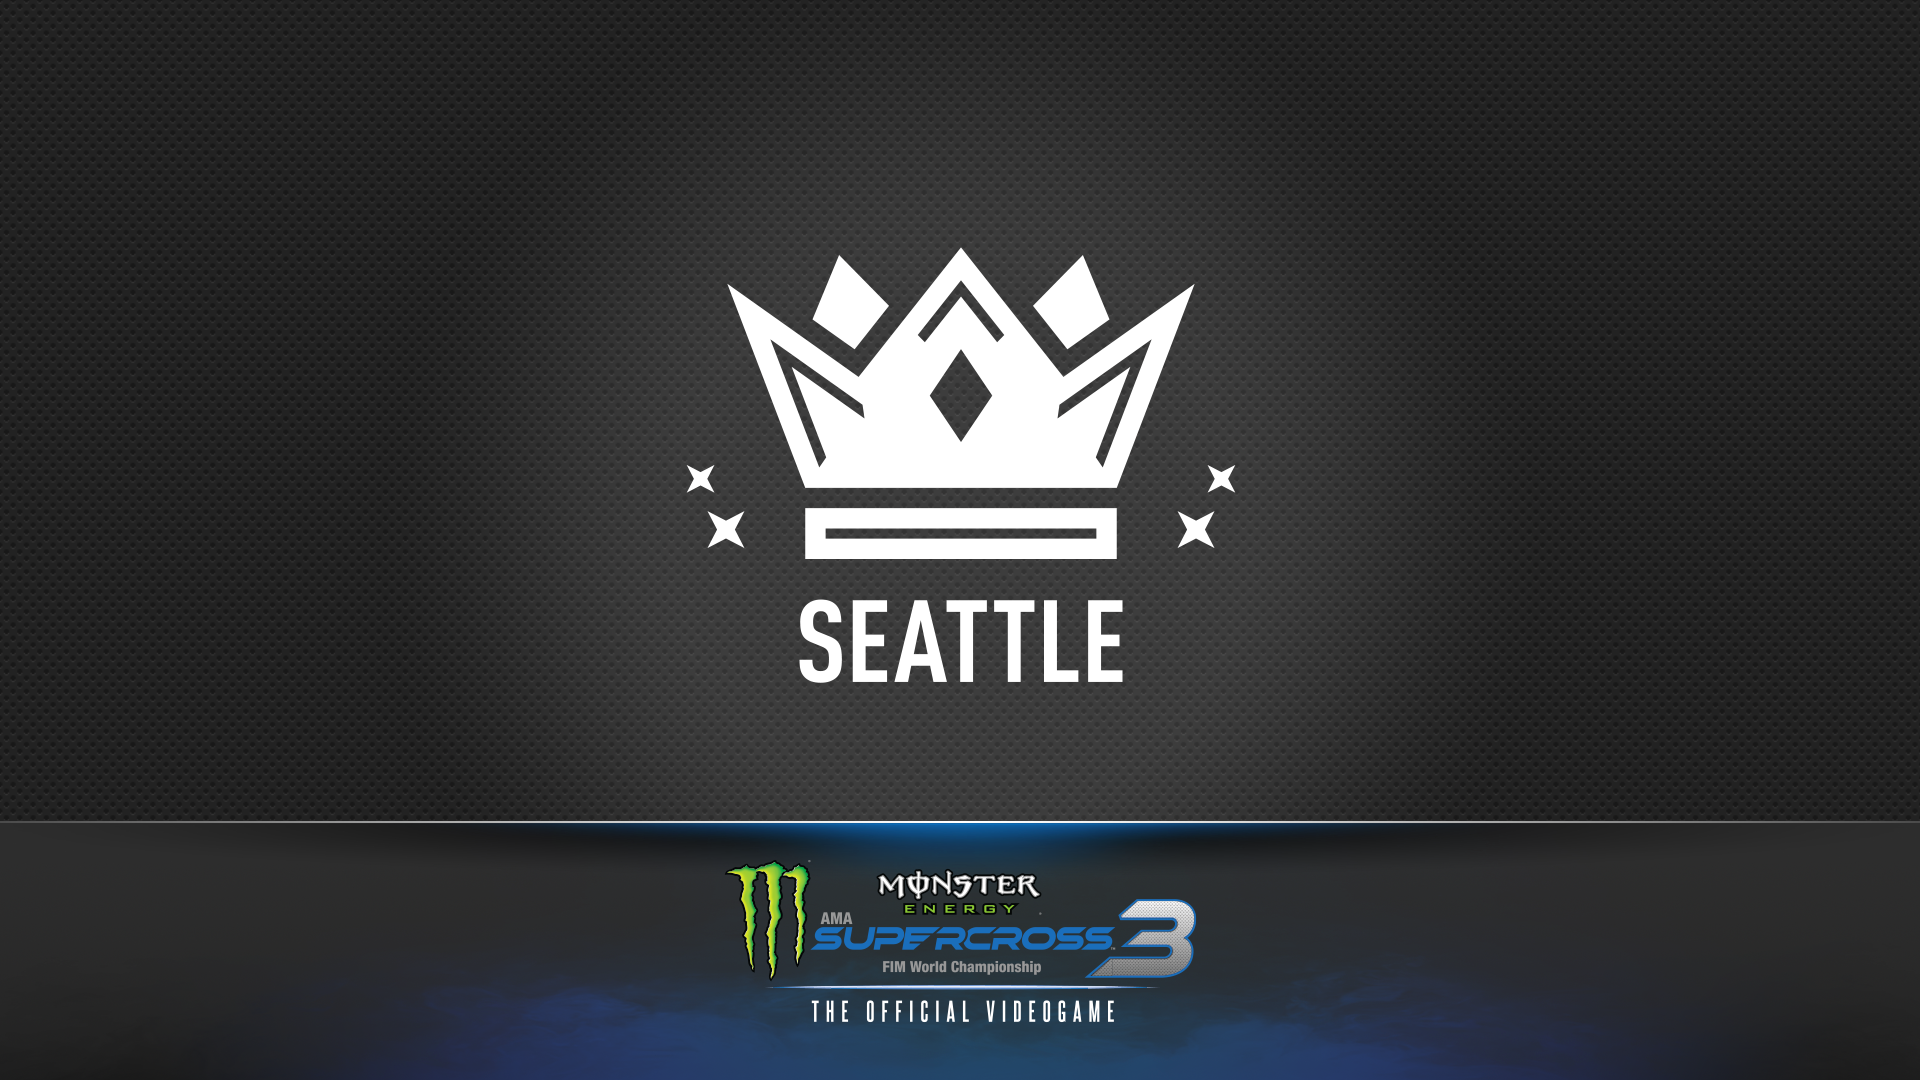 Icon for King of Seattle